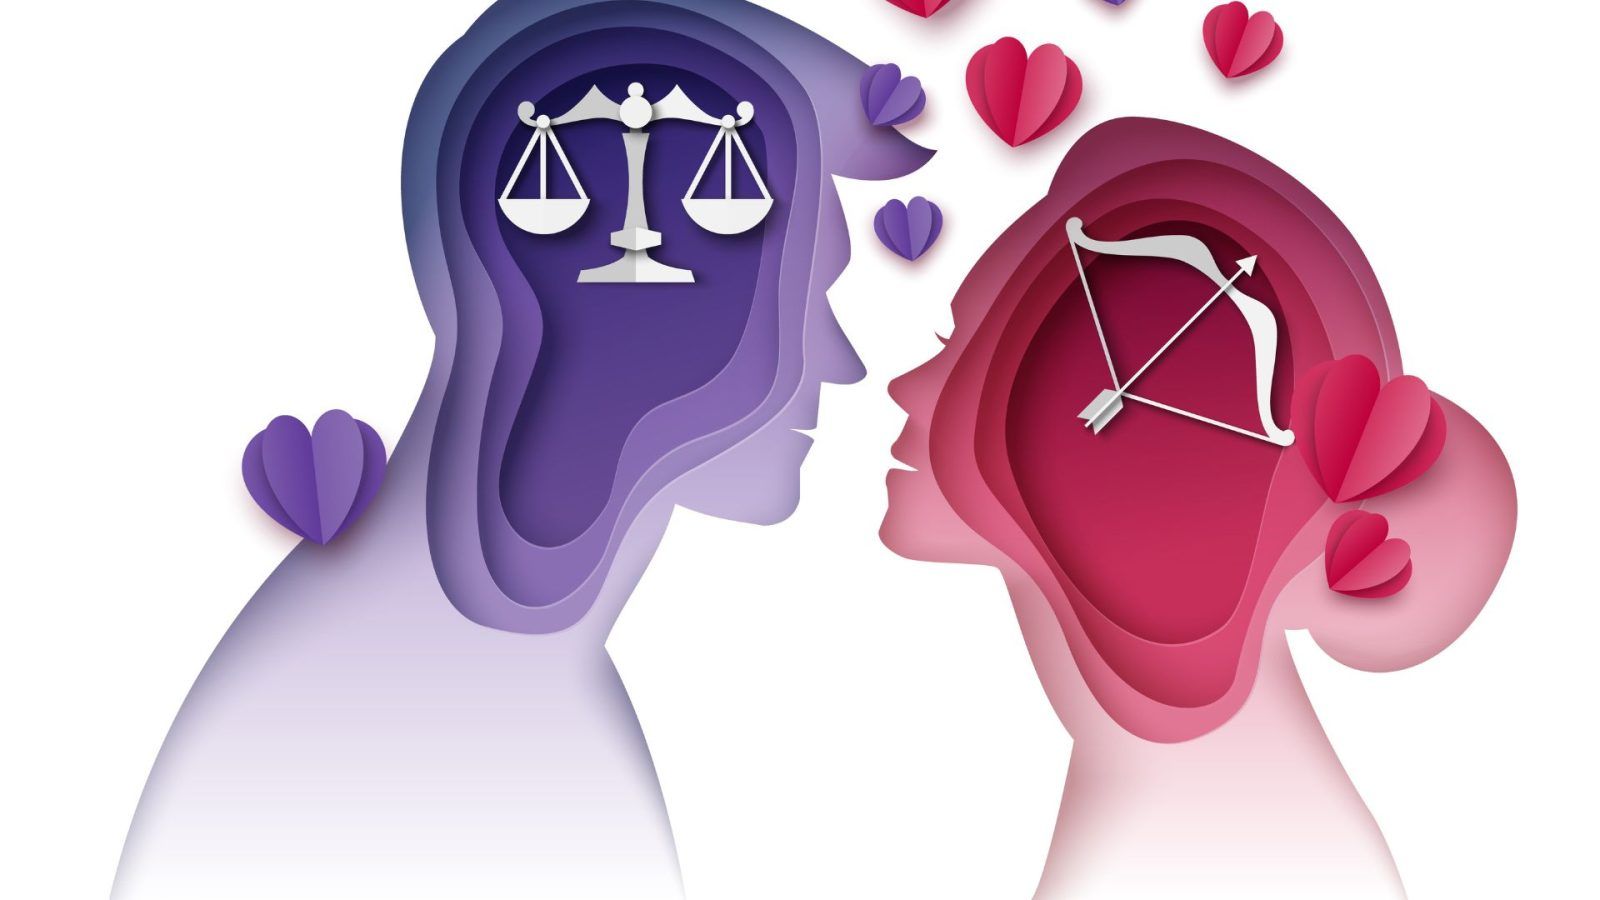 Zodiac compatibility: Know your ideal love match according to